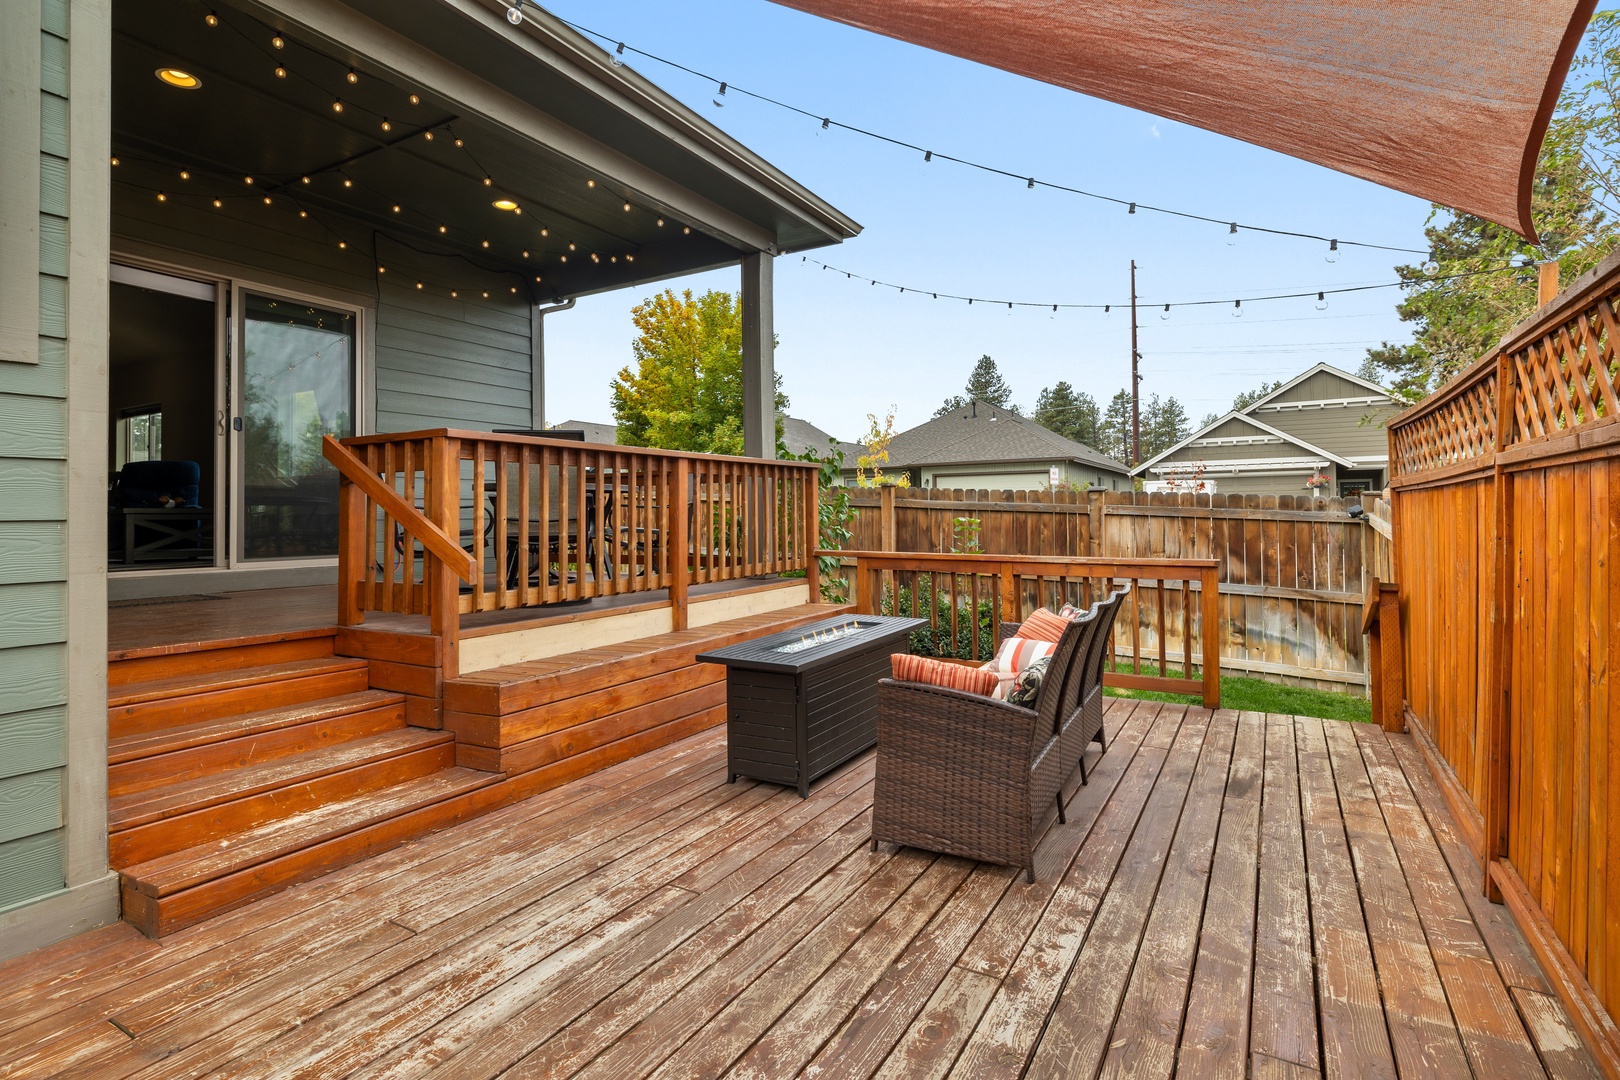 Unwind at the fire table on the back deck & make memories together